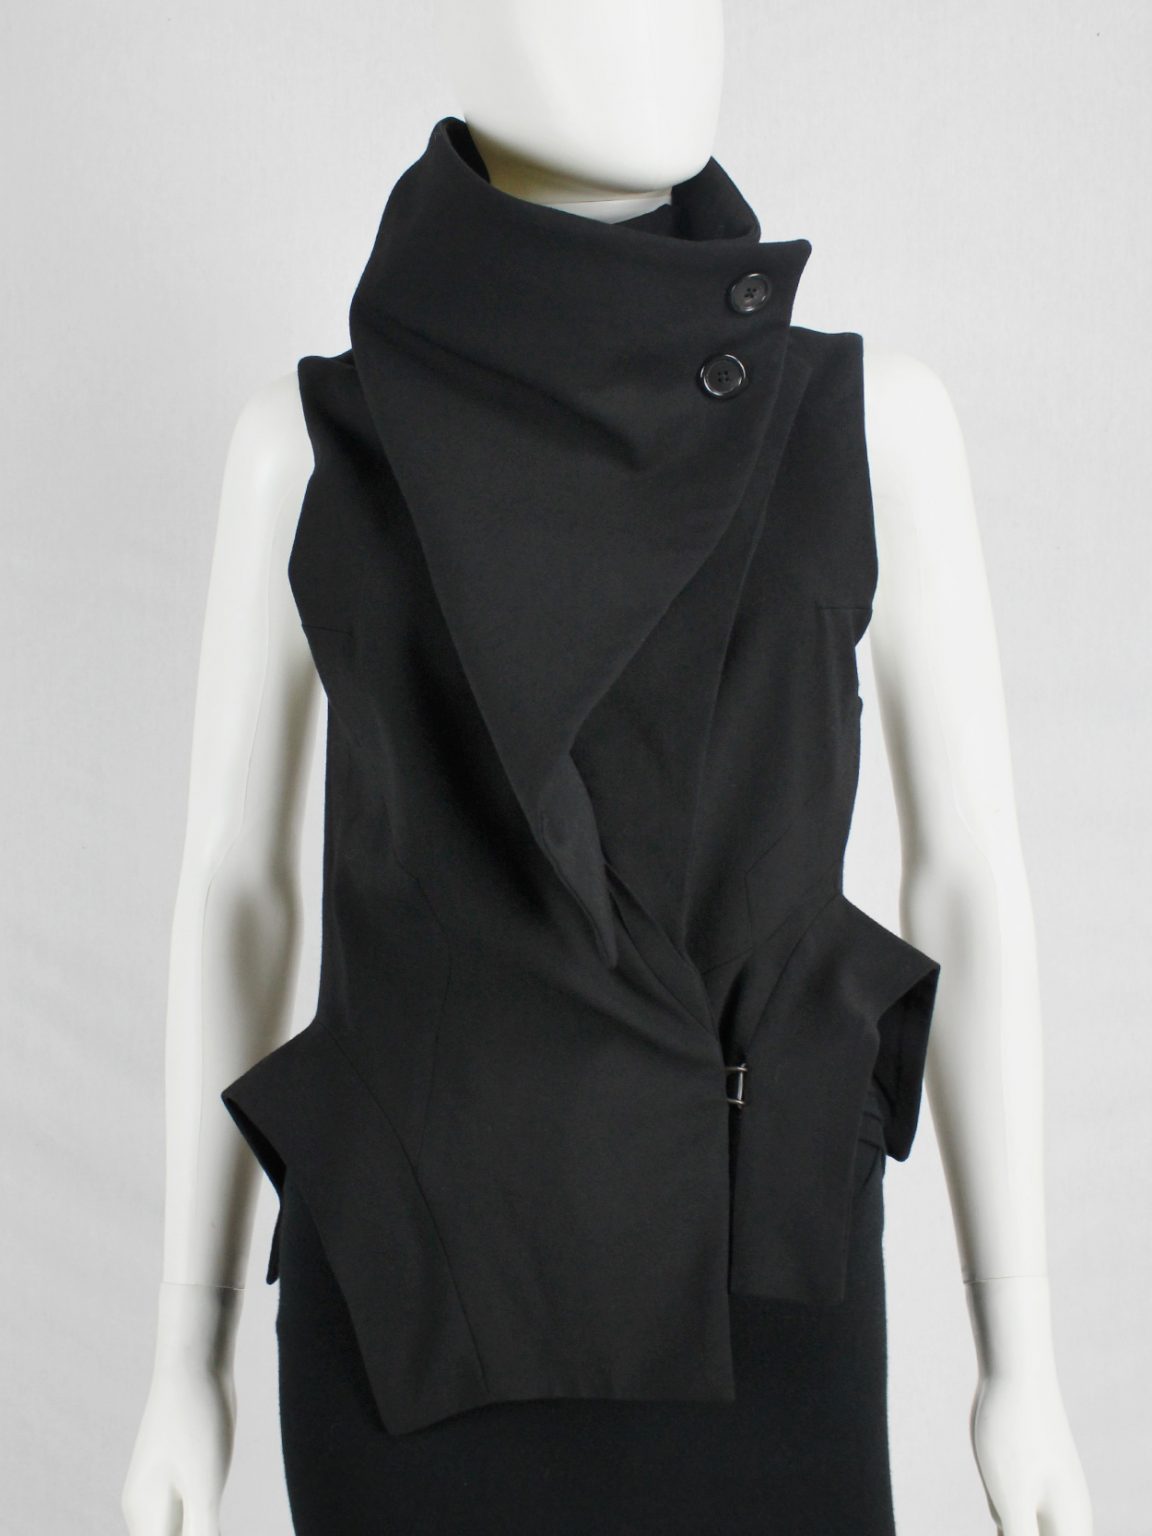 Ann Demeulemeester black draped vest with standing collar and zipper panels — fall 2012